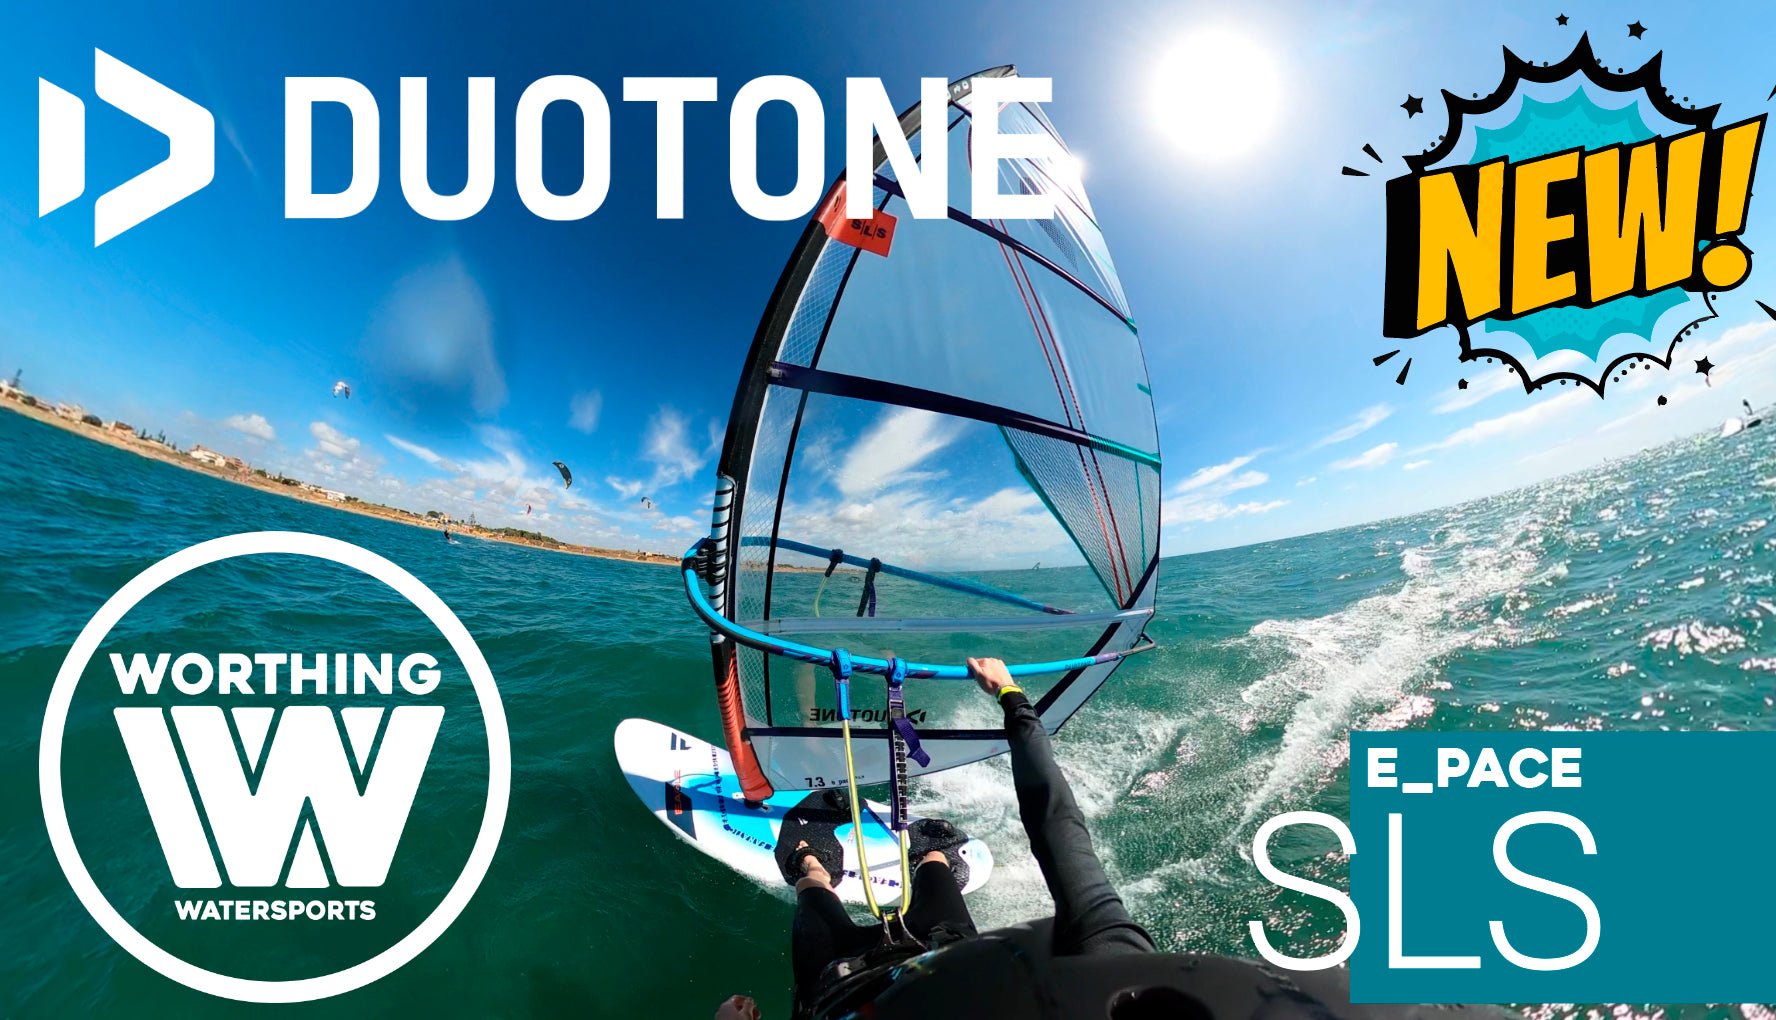 Duotone E_Pace SLS Review - Worthing Watersports